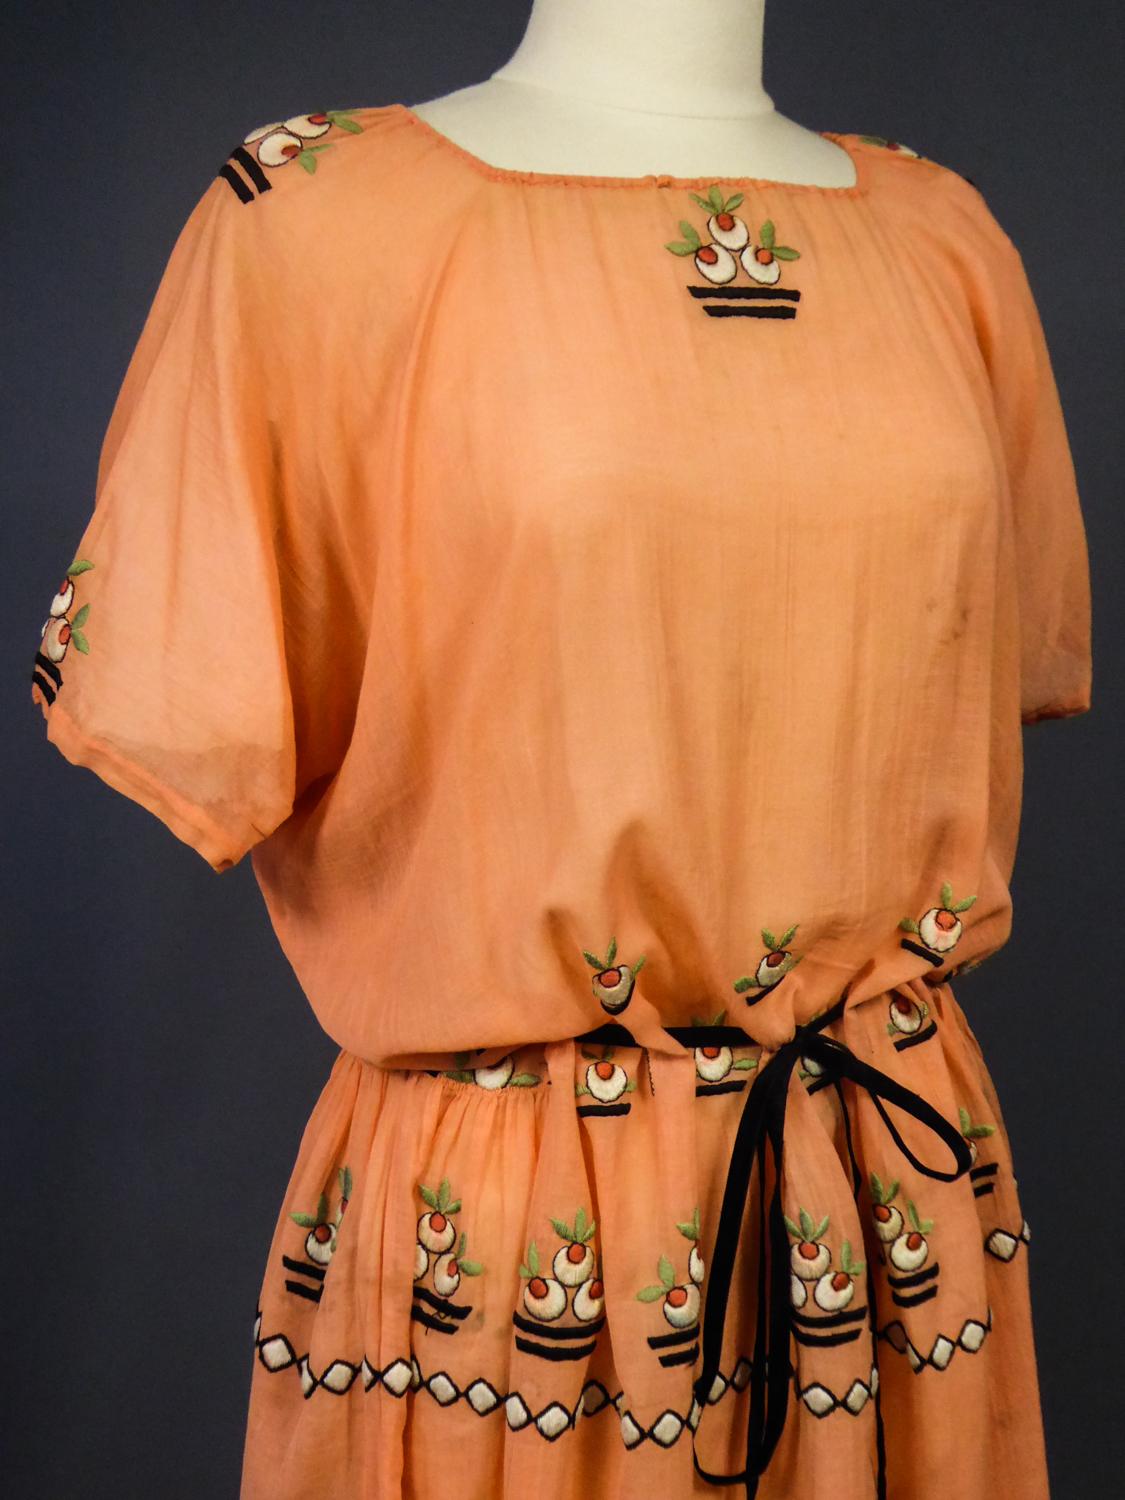 A Seaside Embroidered Cotton Dress in the style of Atelier Martine Circa 1920 For Sale 2